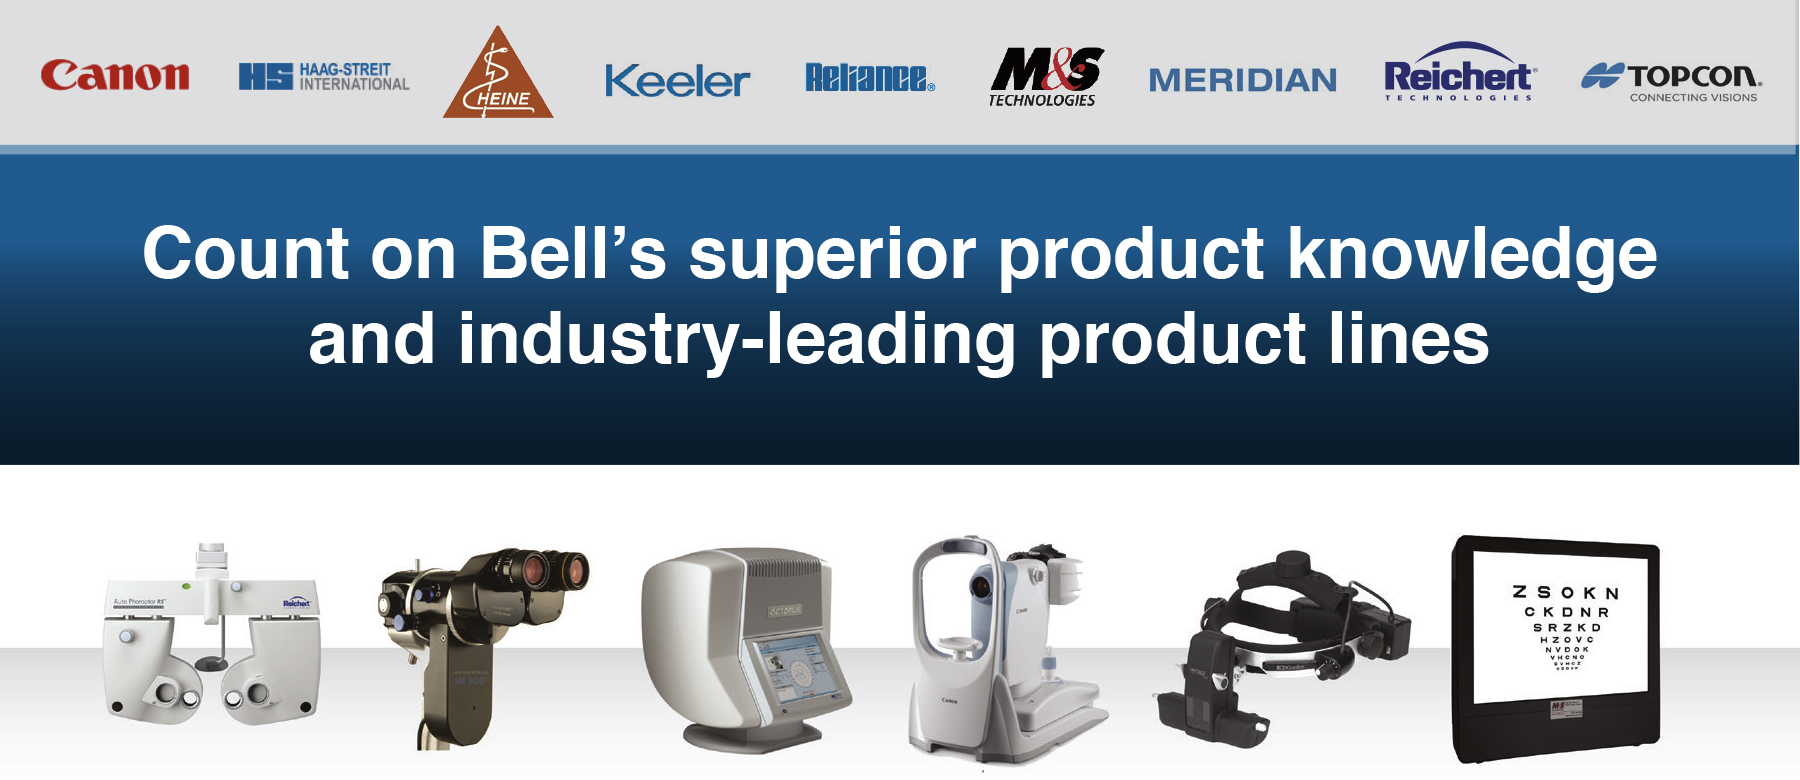 Count on Bell's superior product knowledge and industry-leading product lines